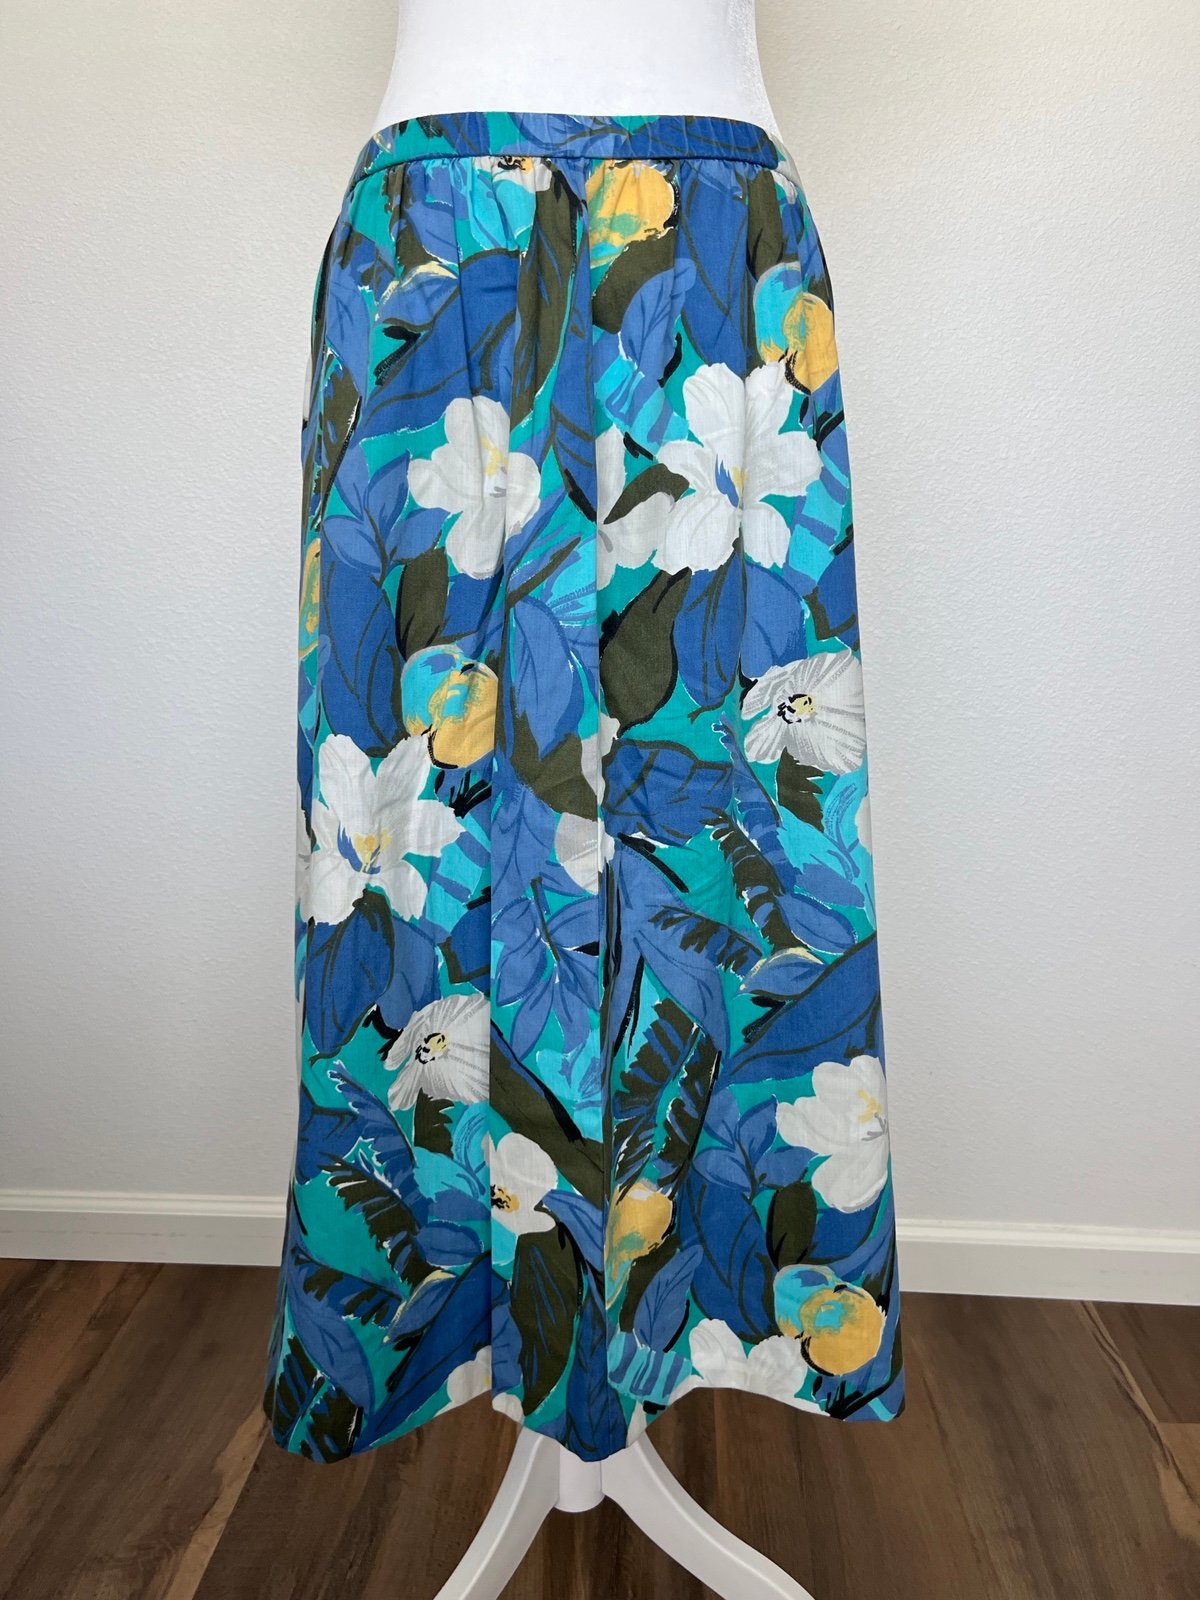 Popular Vintage Alfred Dunner Tropical Floral Maxi Skirt Blue White Size 18 HouZUd44d New Style